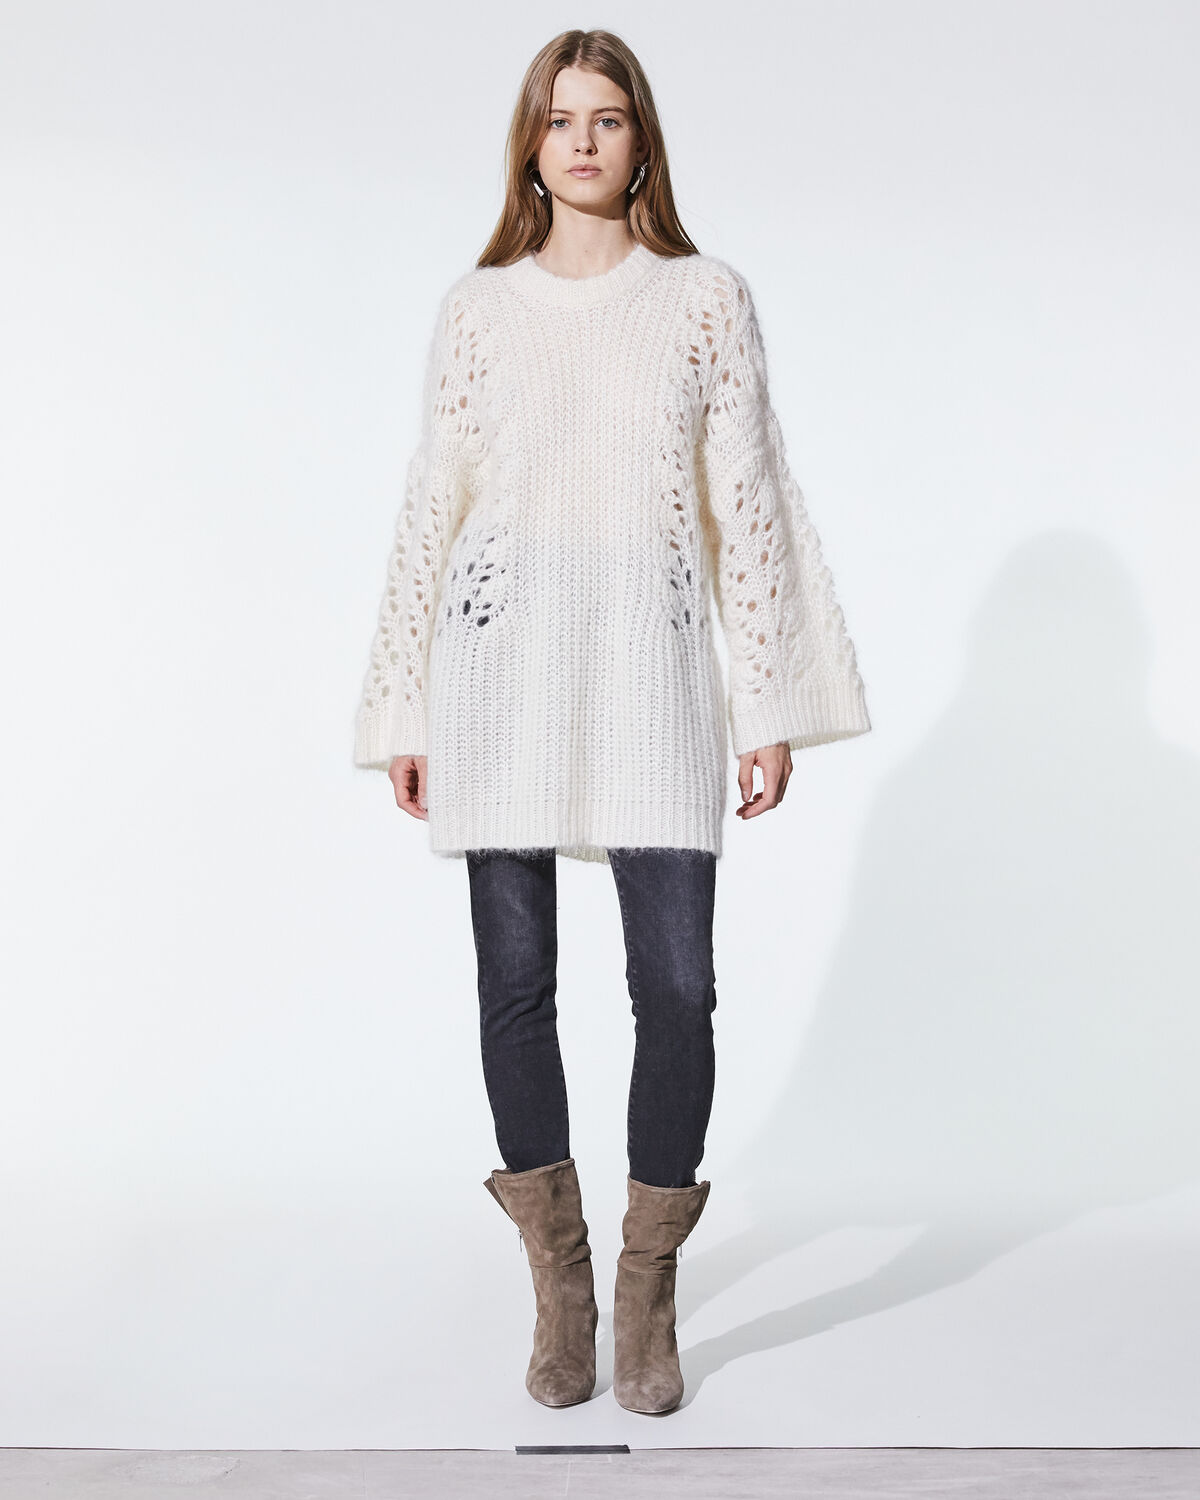 Photo of IRO Paris Chelsey Sweater Chalk - This Wool Blend Sweater With V-neck Is A Sure Value In Women's Dressing Rooms. It Is Distinguished By Its Very Long Sleeves And Its Relaxed And Worn-out Mesh Details. Wear It With A Black Skinny For A Casual And Rock Look. Fall Winter 19